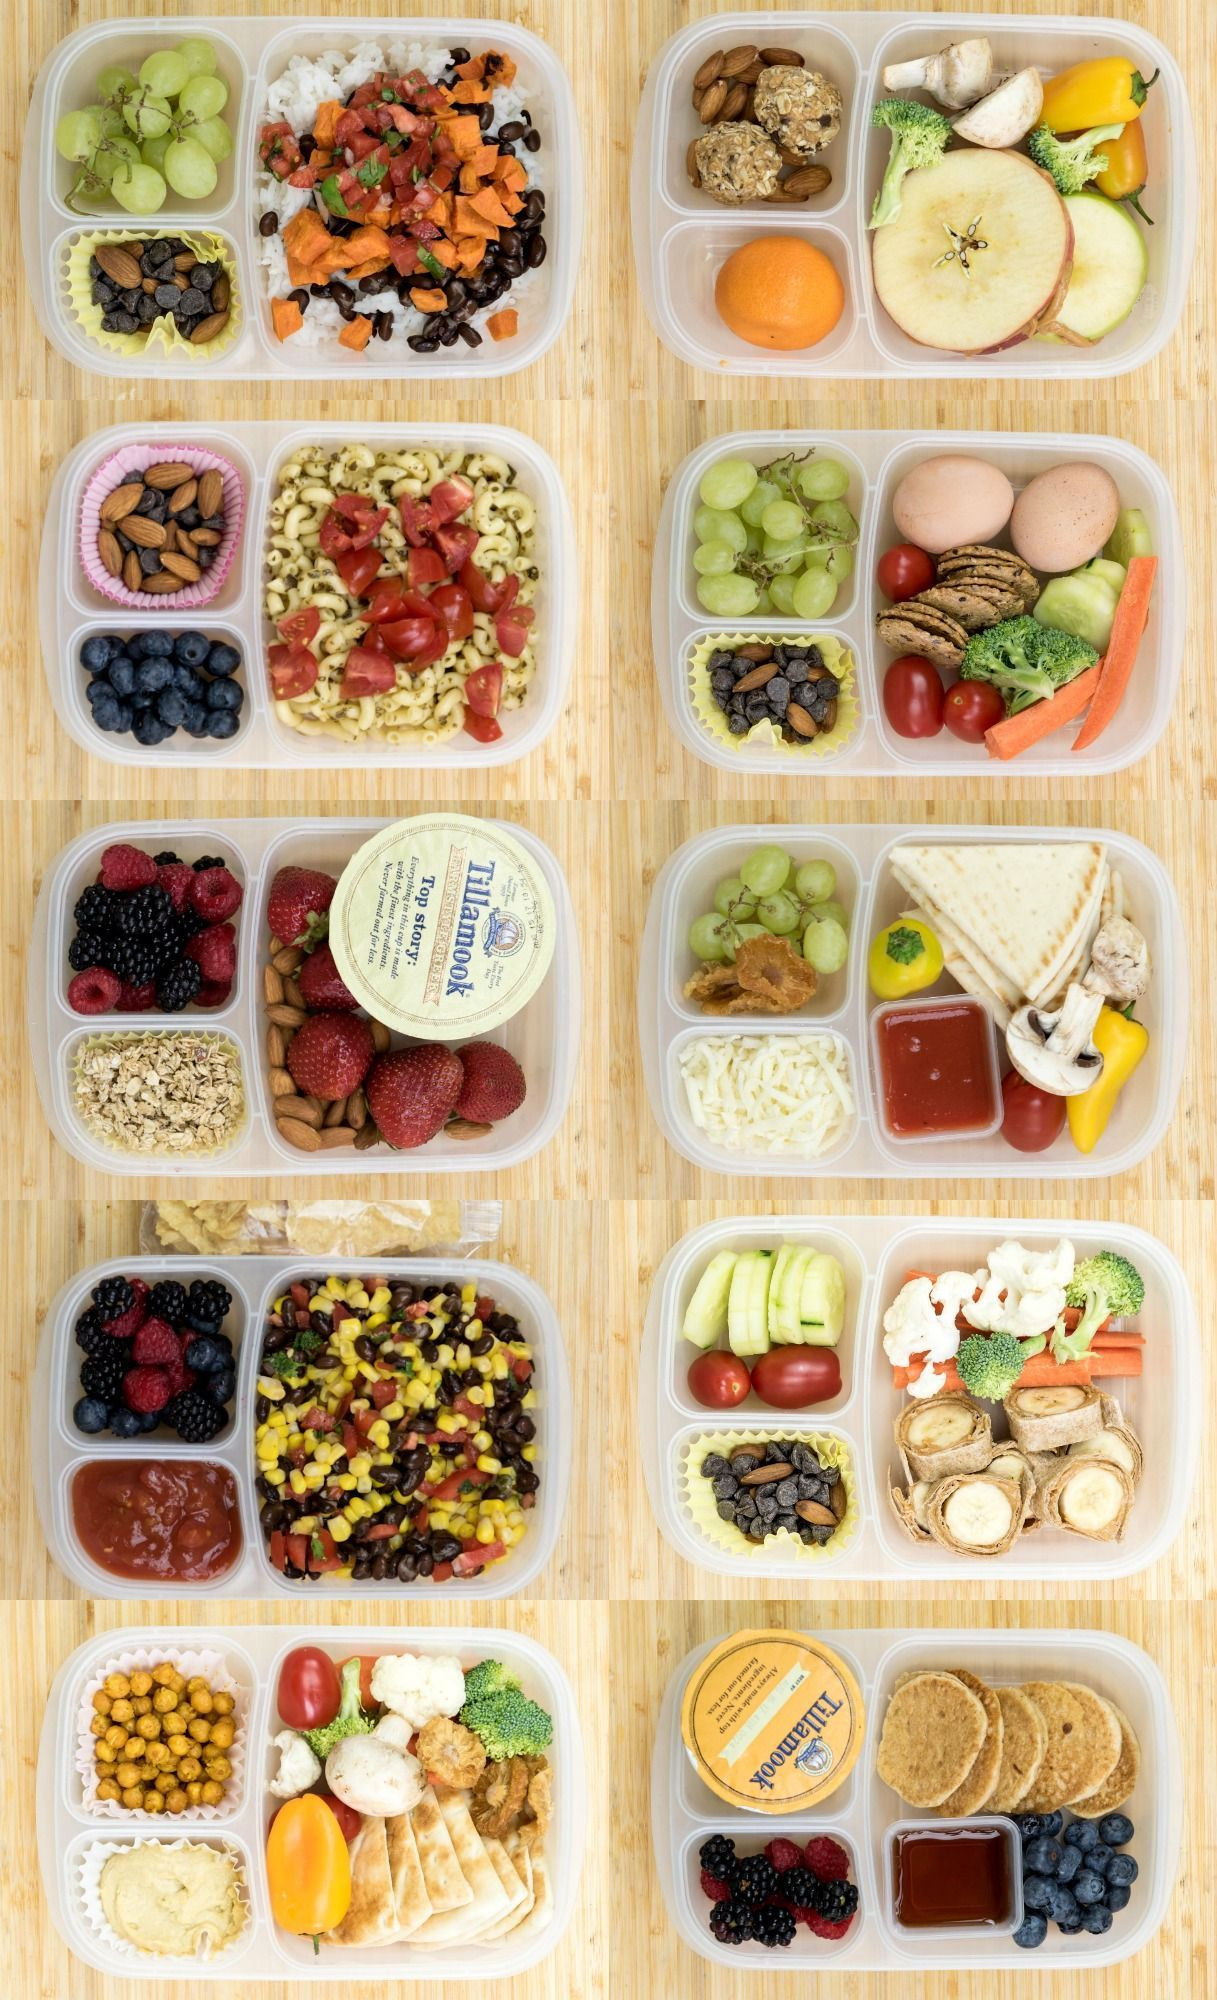 Healthy Snacks For Kids Lunch Boxes
 12 Healthy Lunch Box Ideas for Kids or Adults that are